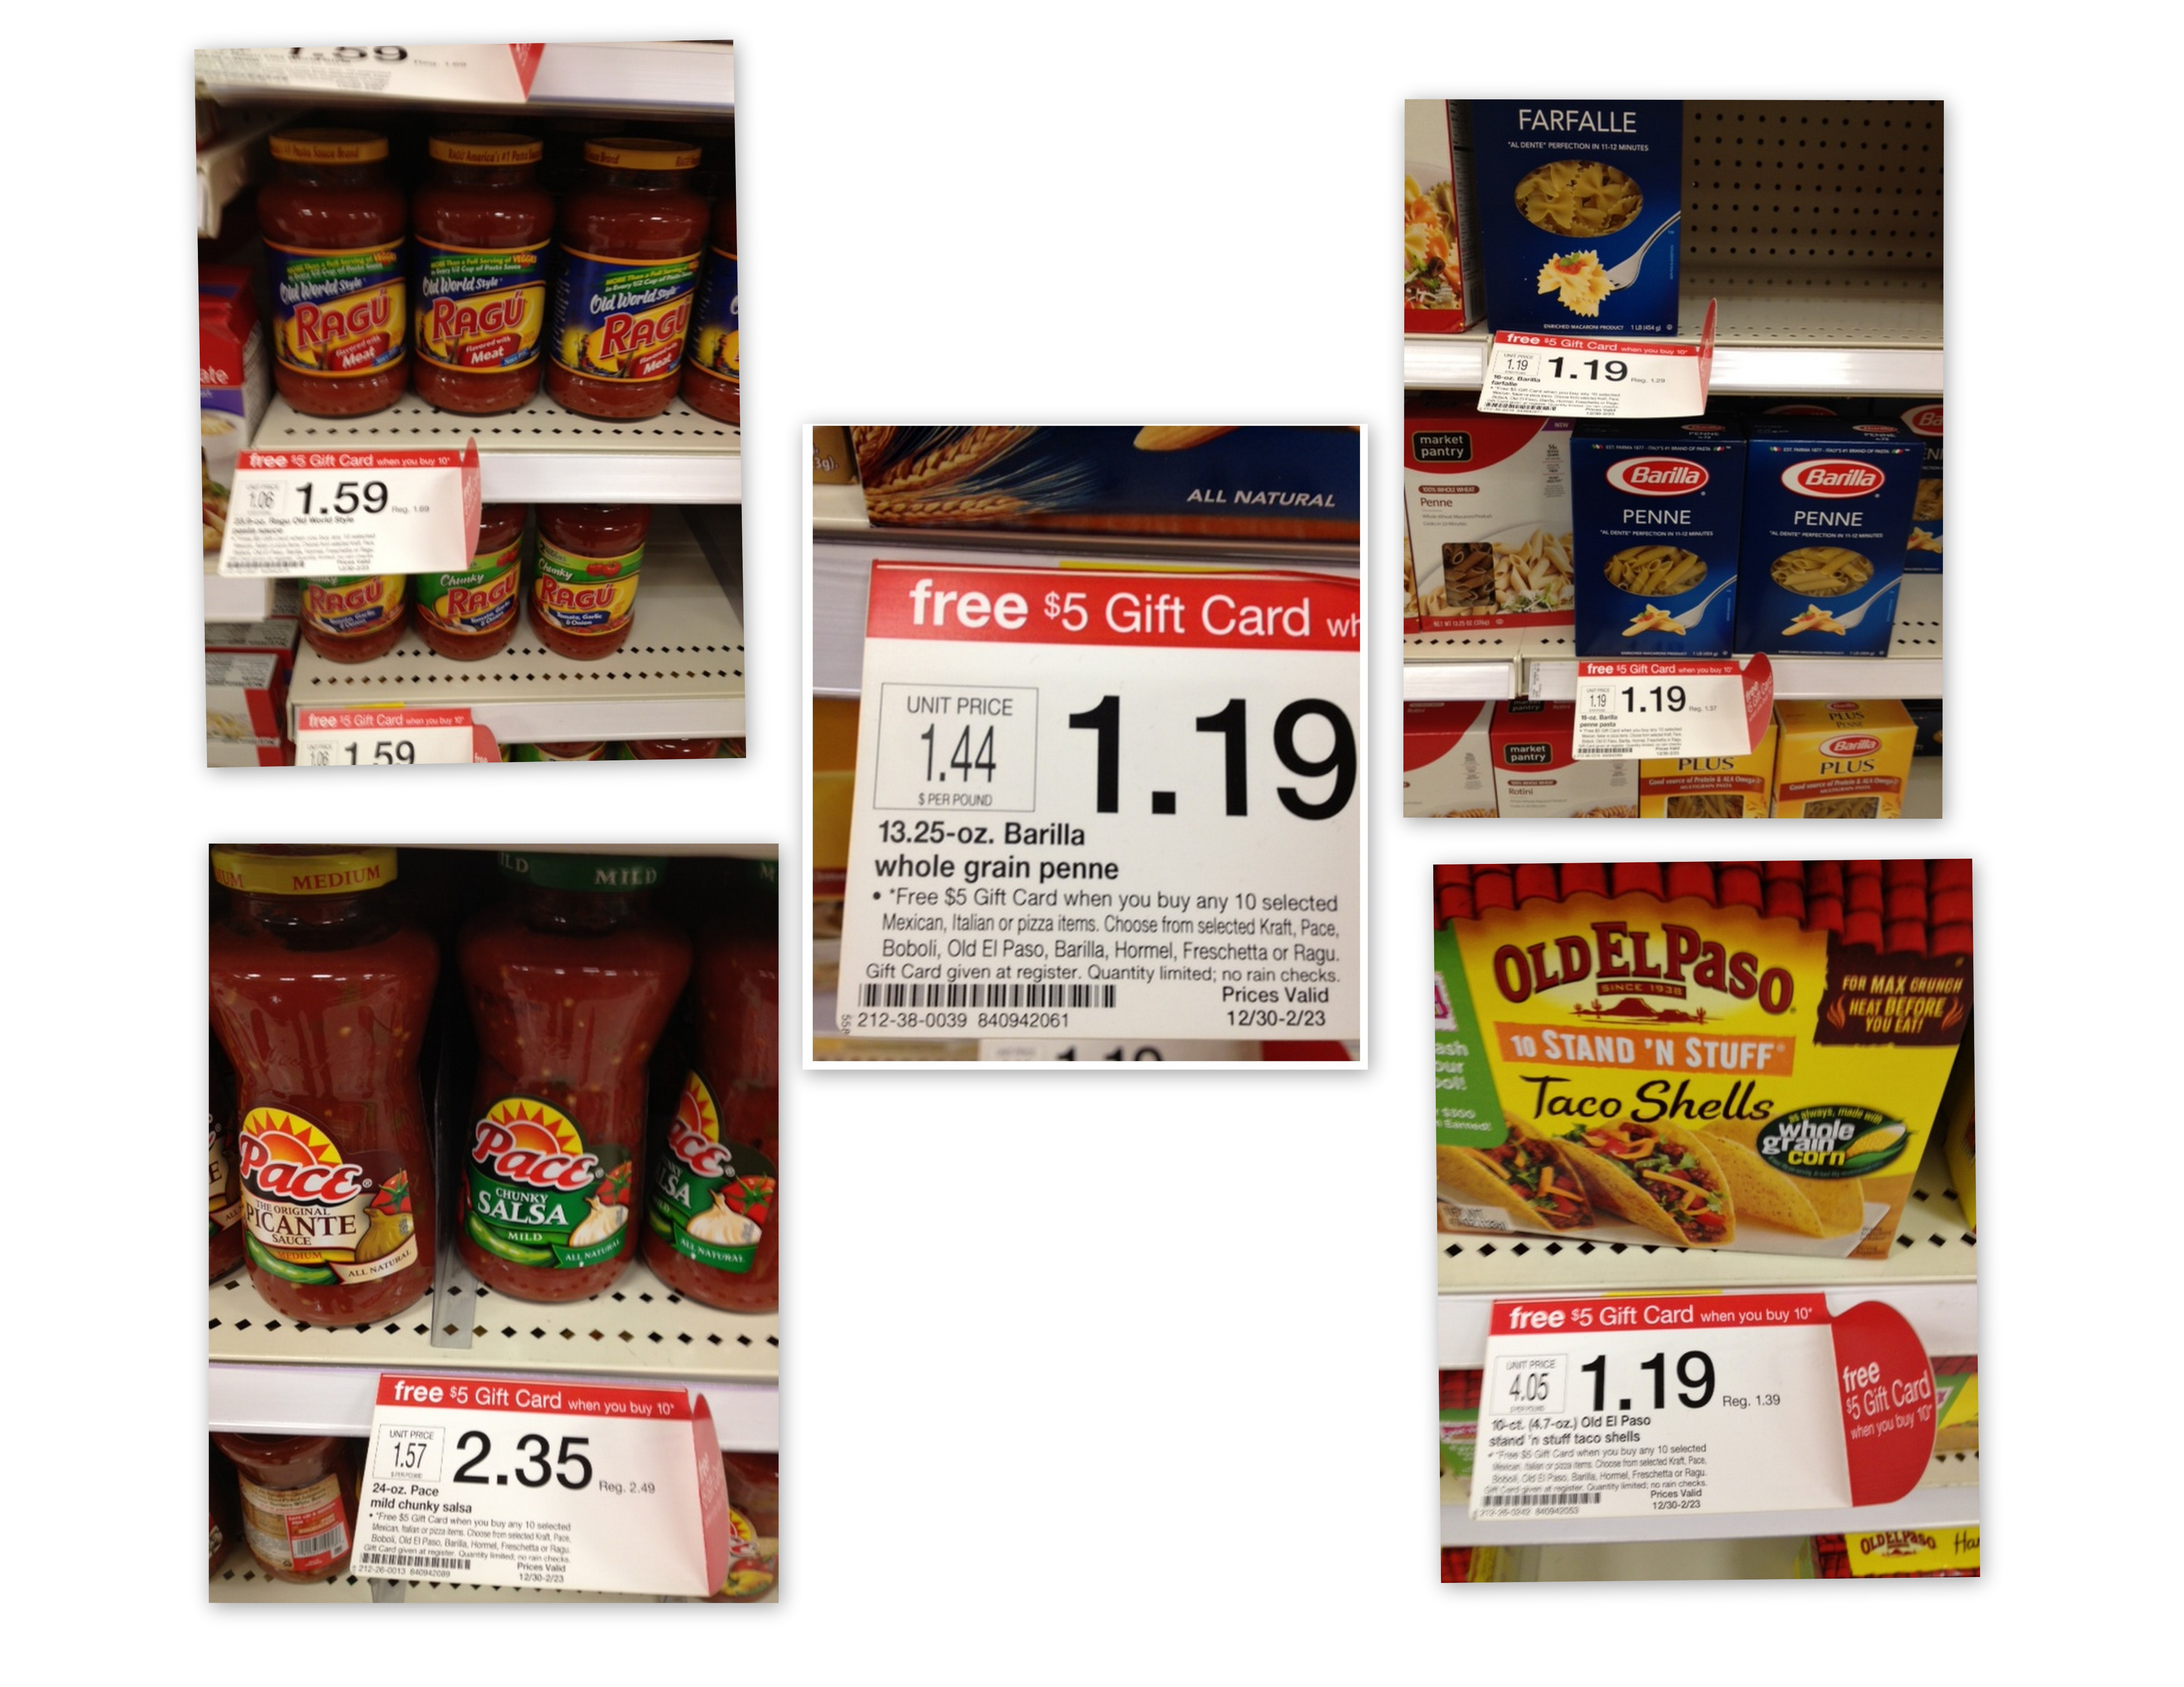 Target Unadvertised Gift Card Deal (Super Cheap Old El Paso, Barilla, Ragu and More!)